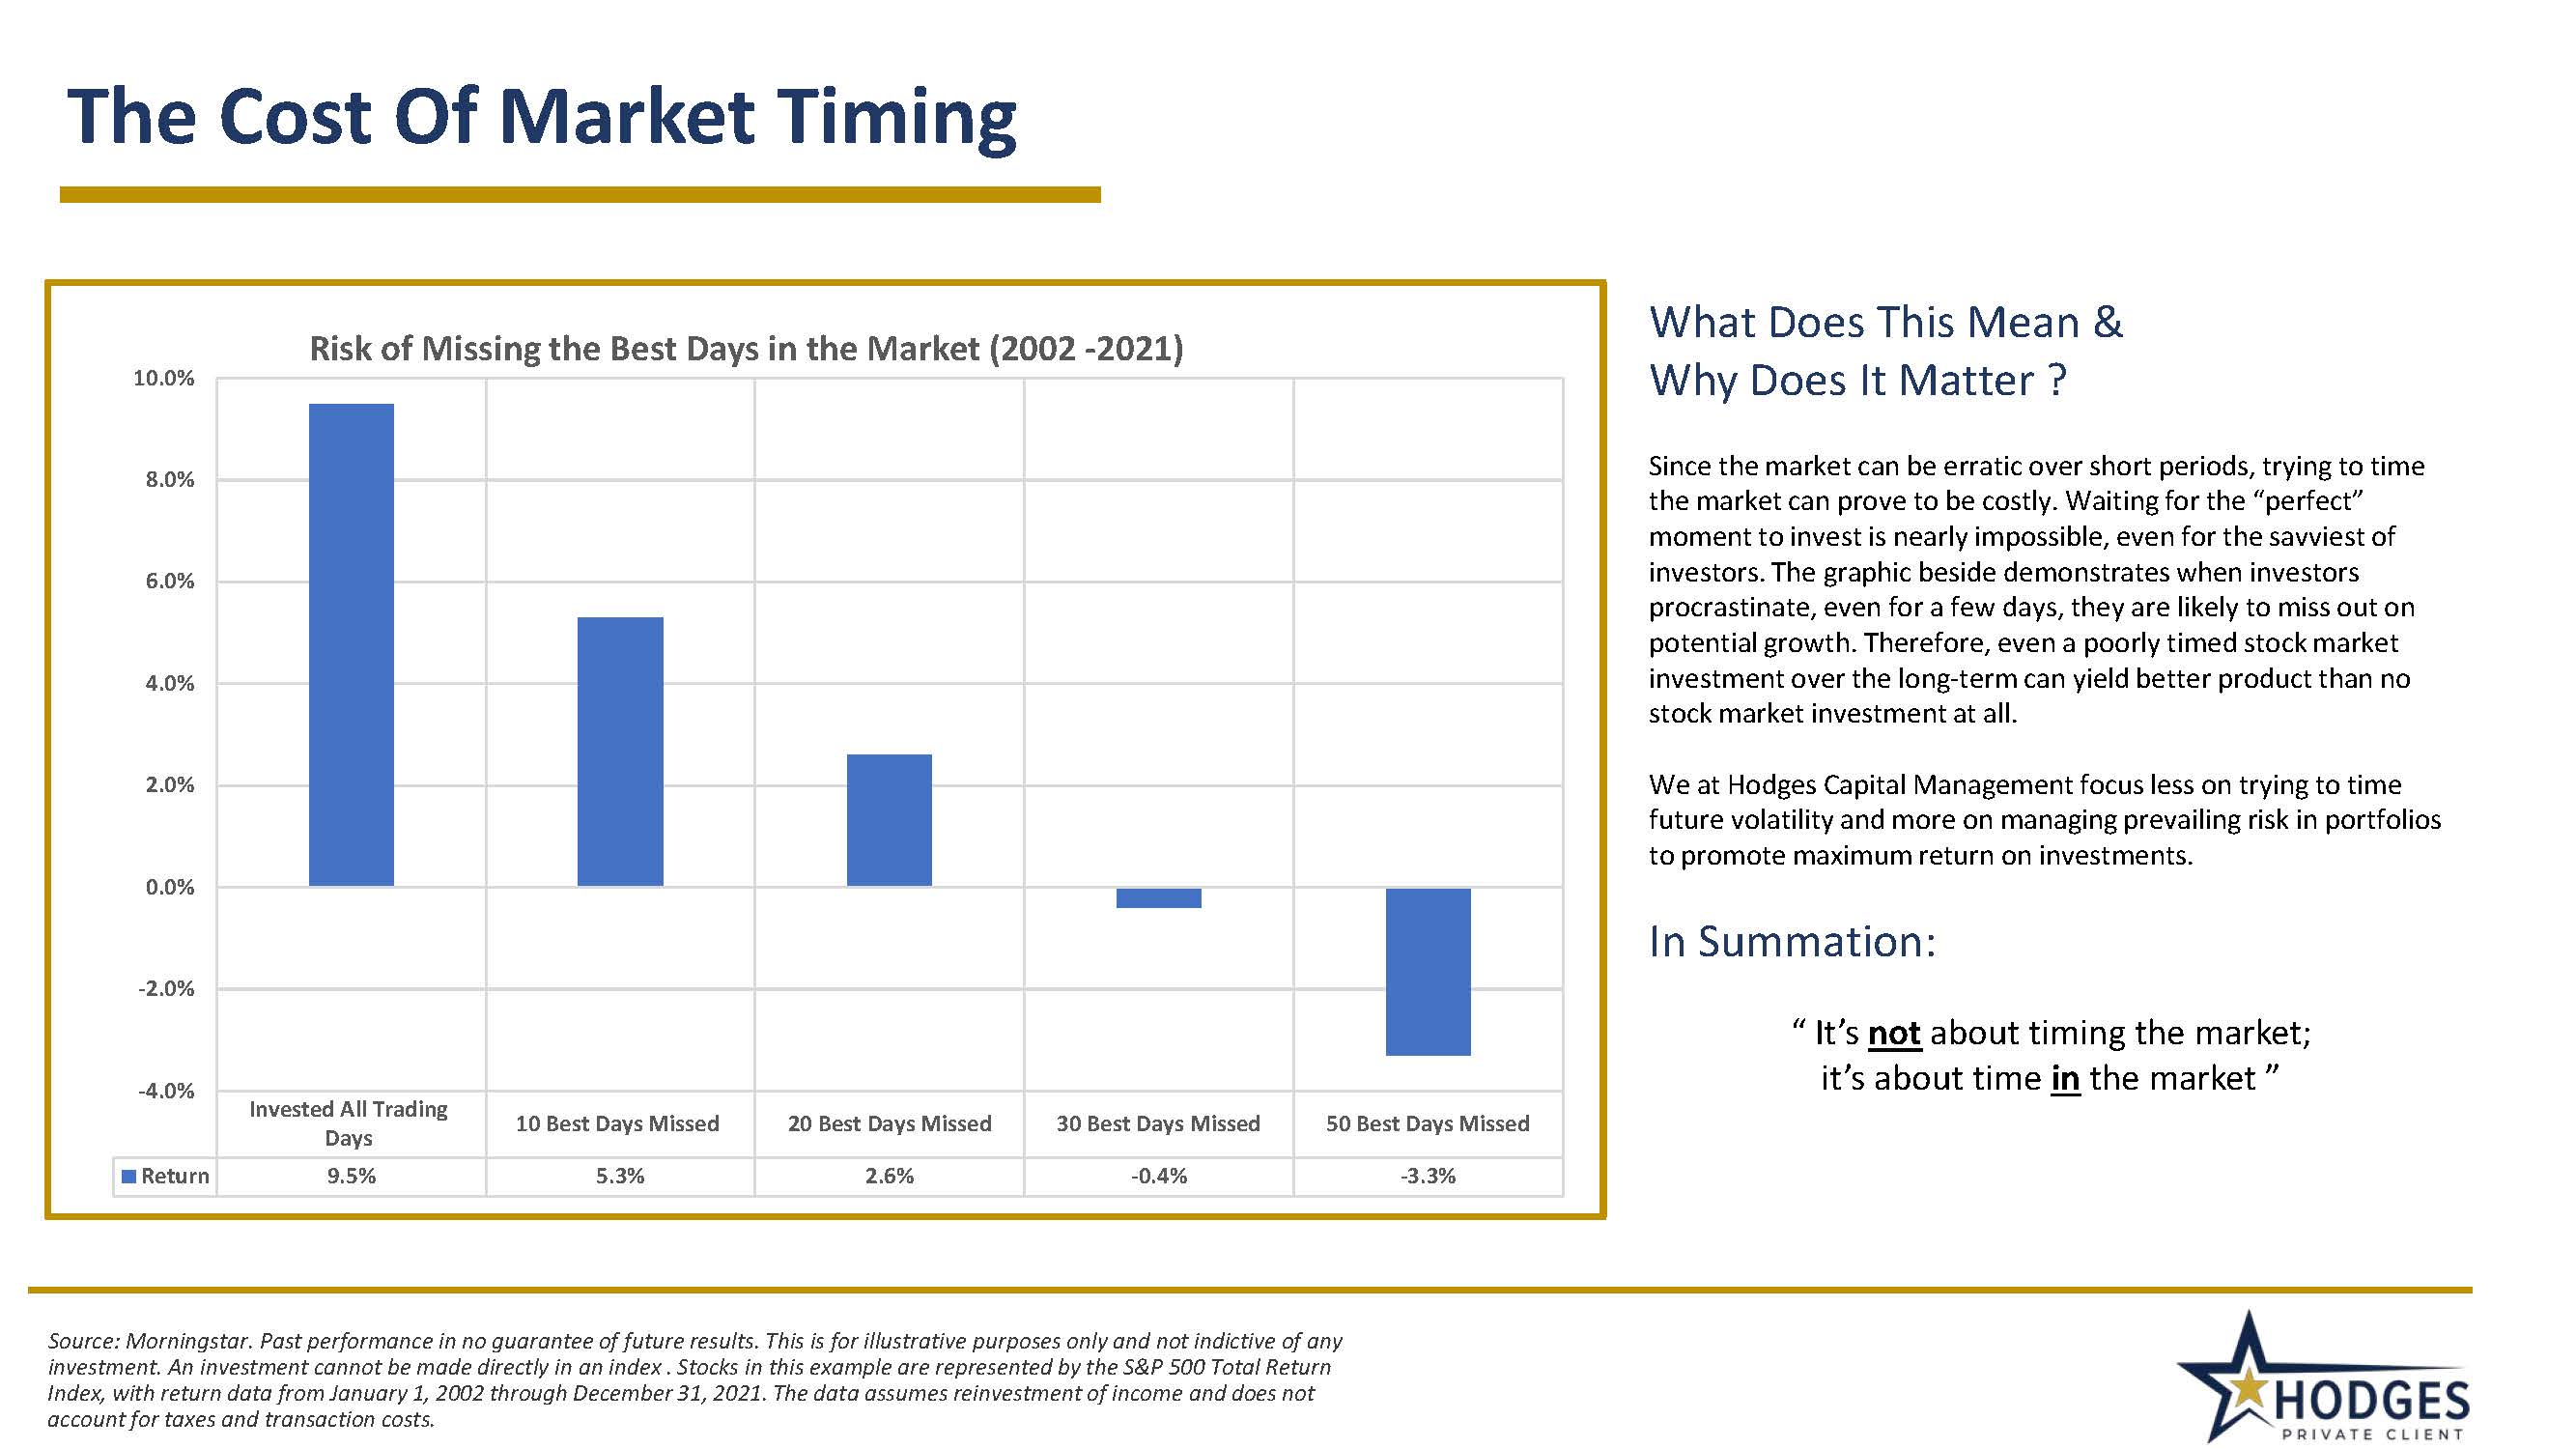 The cost of market timing graphic final (003) (002)